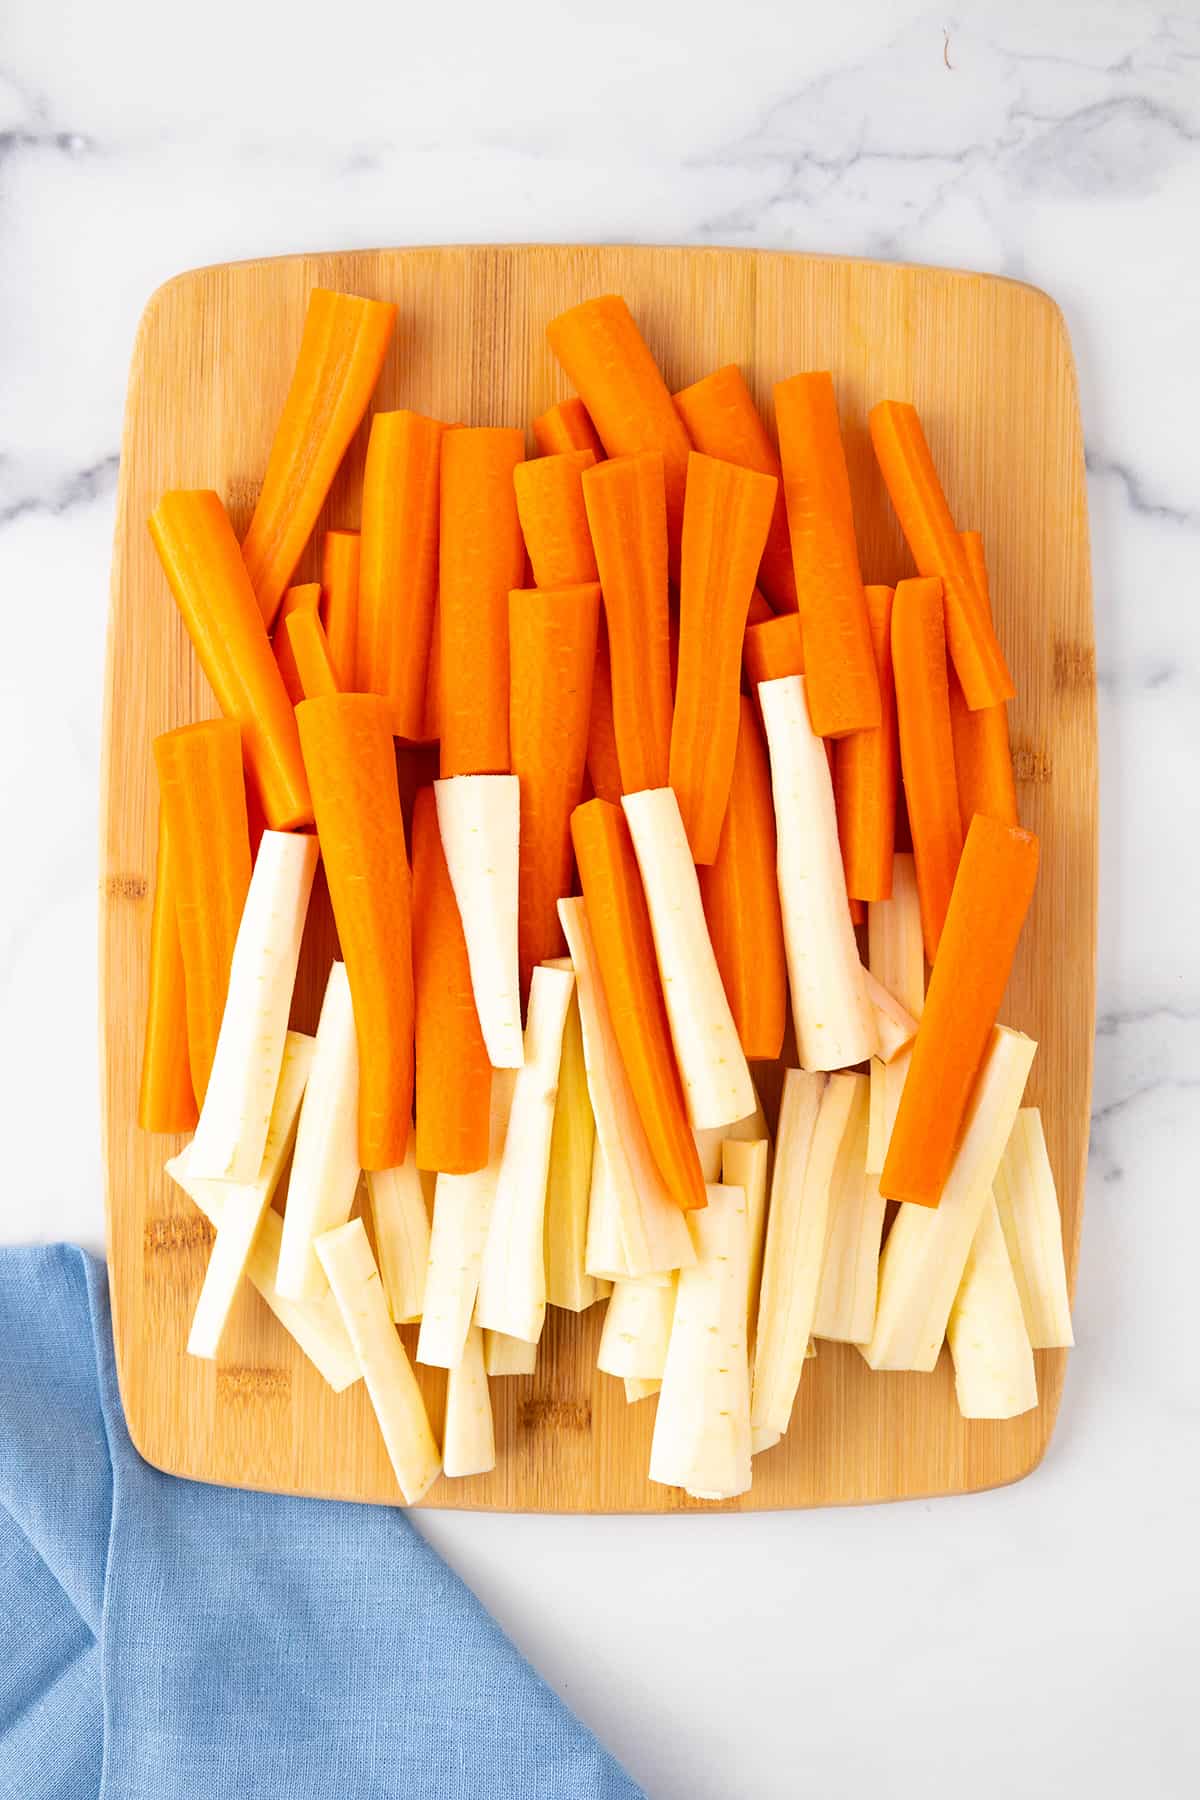 A wooden cutting board with carrots and parsnips that have been cut into spears with a blue napkin laying nearby.